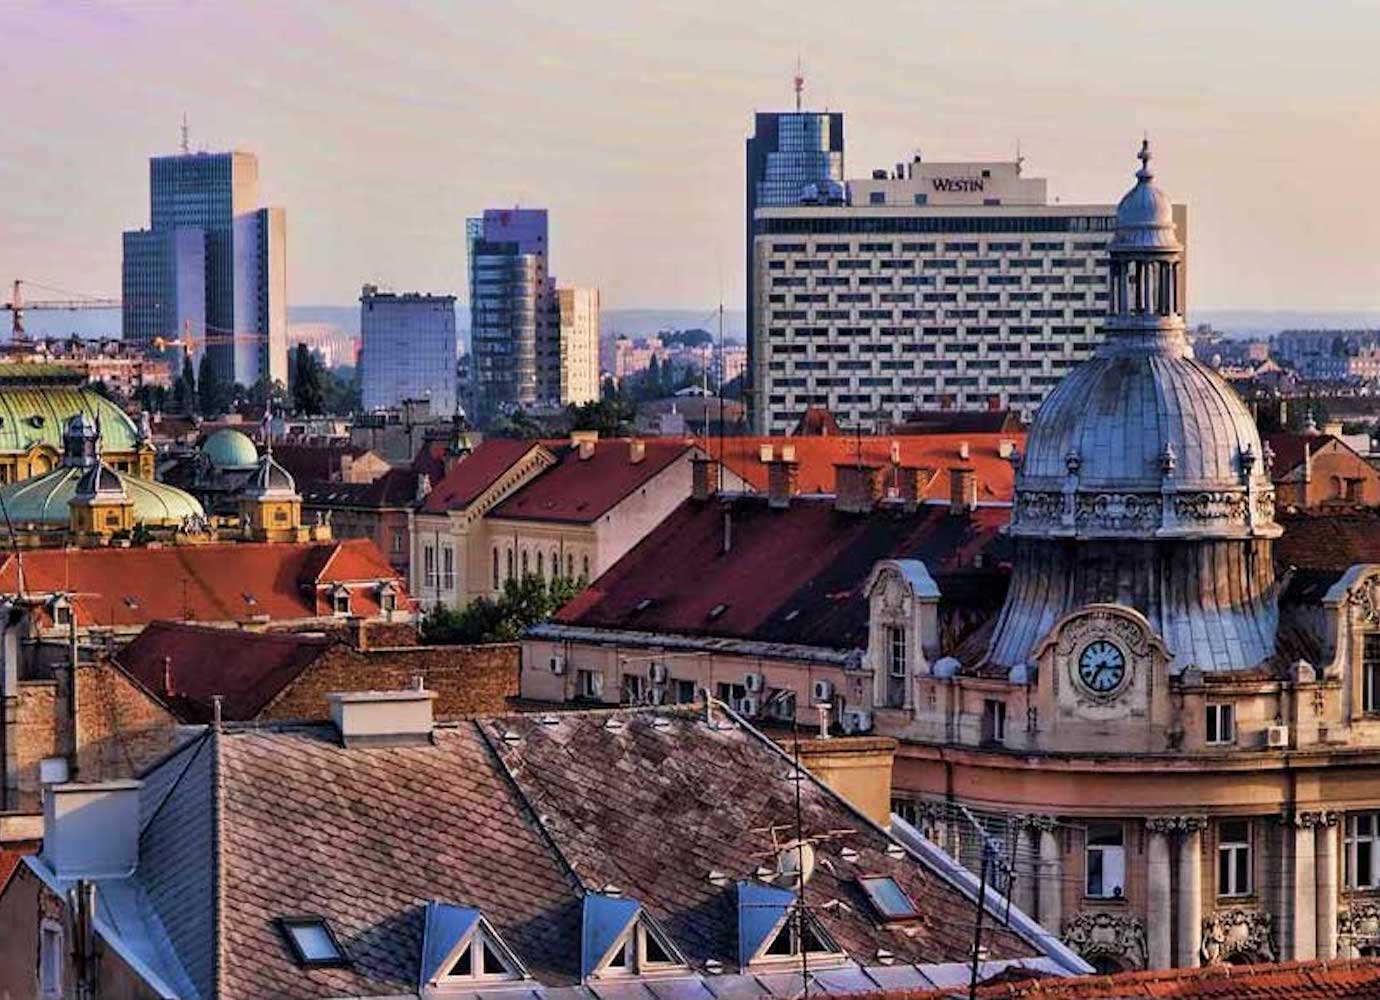 The Mayor of Zagreb wants to build Croatia’s own Manhattan — and locals are taking to the streets to stop him